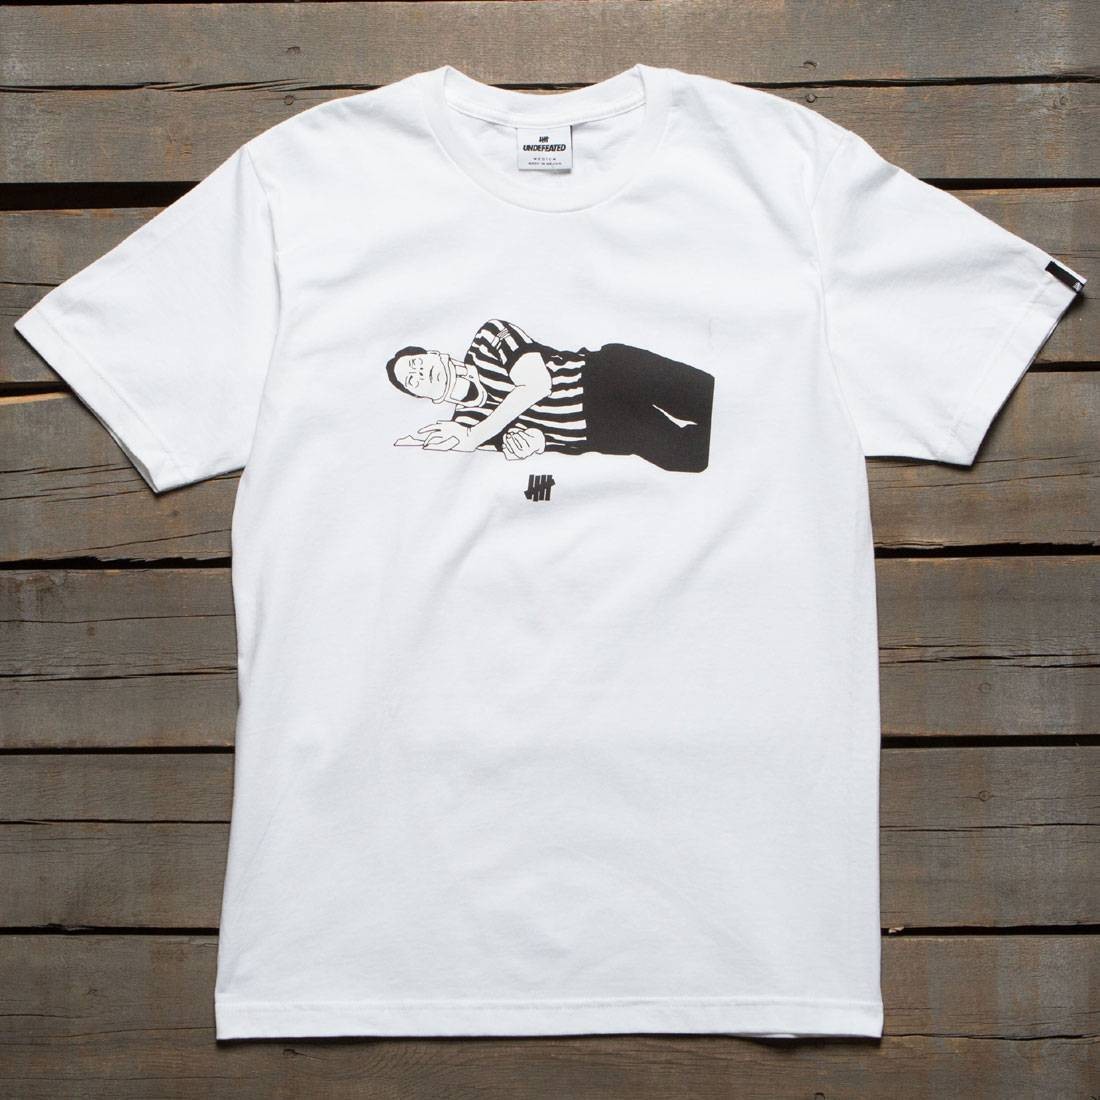 Undefeated Men Refed Tee (white)